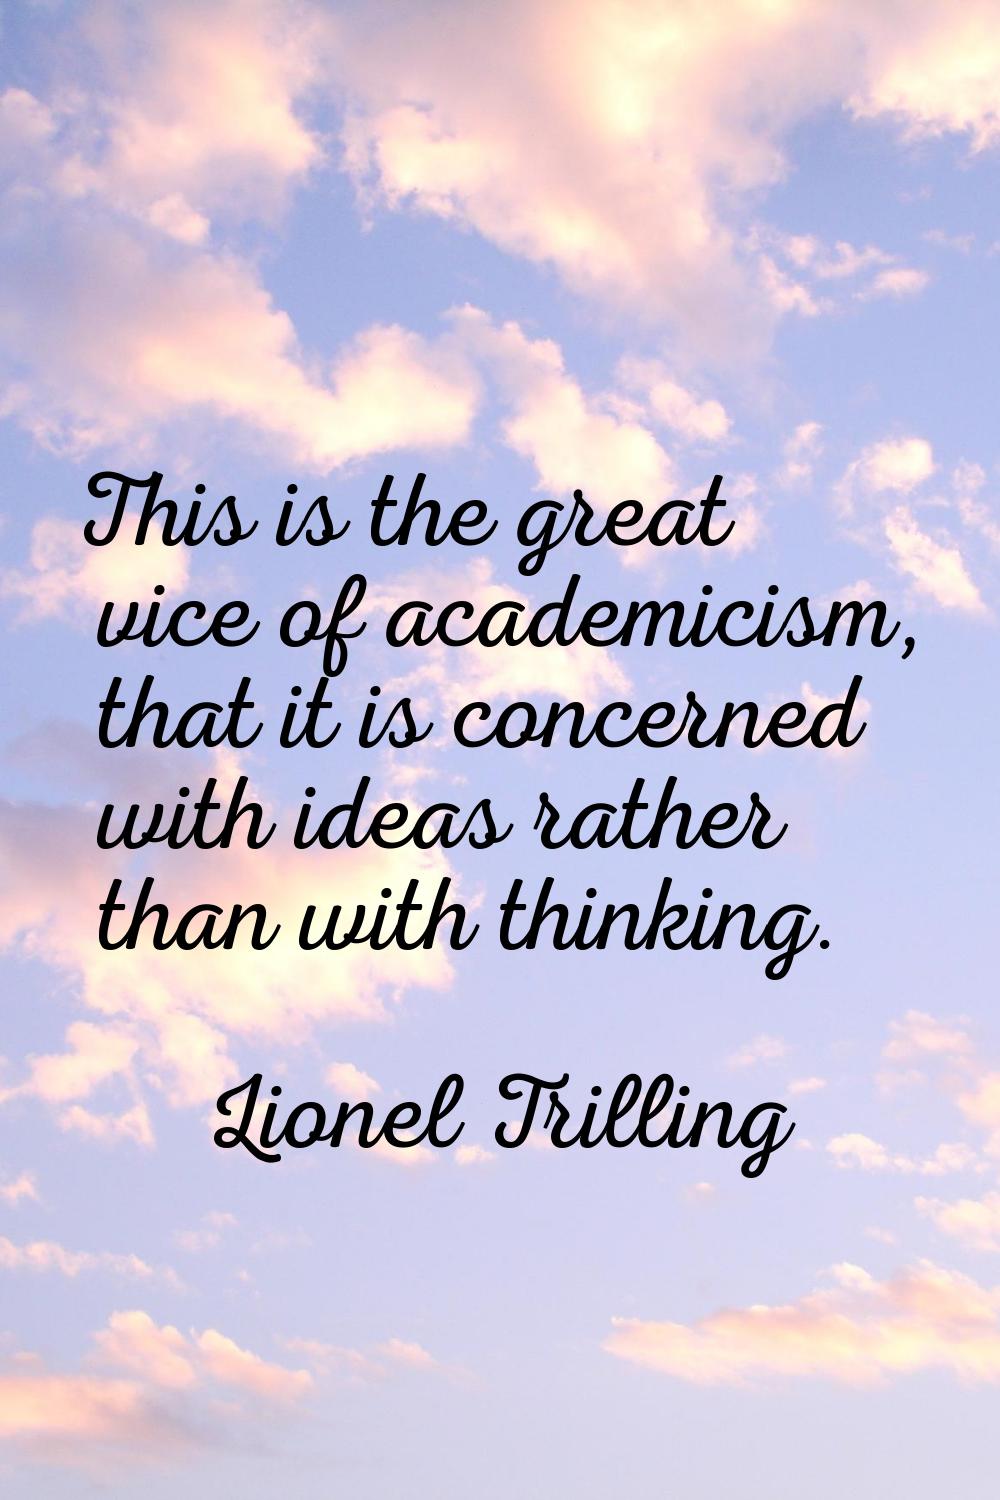 This is the great vice of academicism, that it is concerned with ideas rather than with thinking.